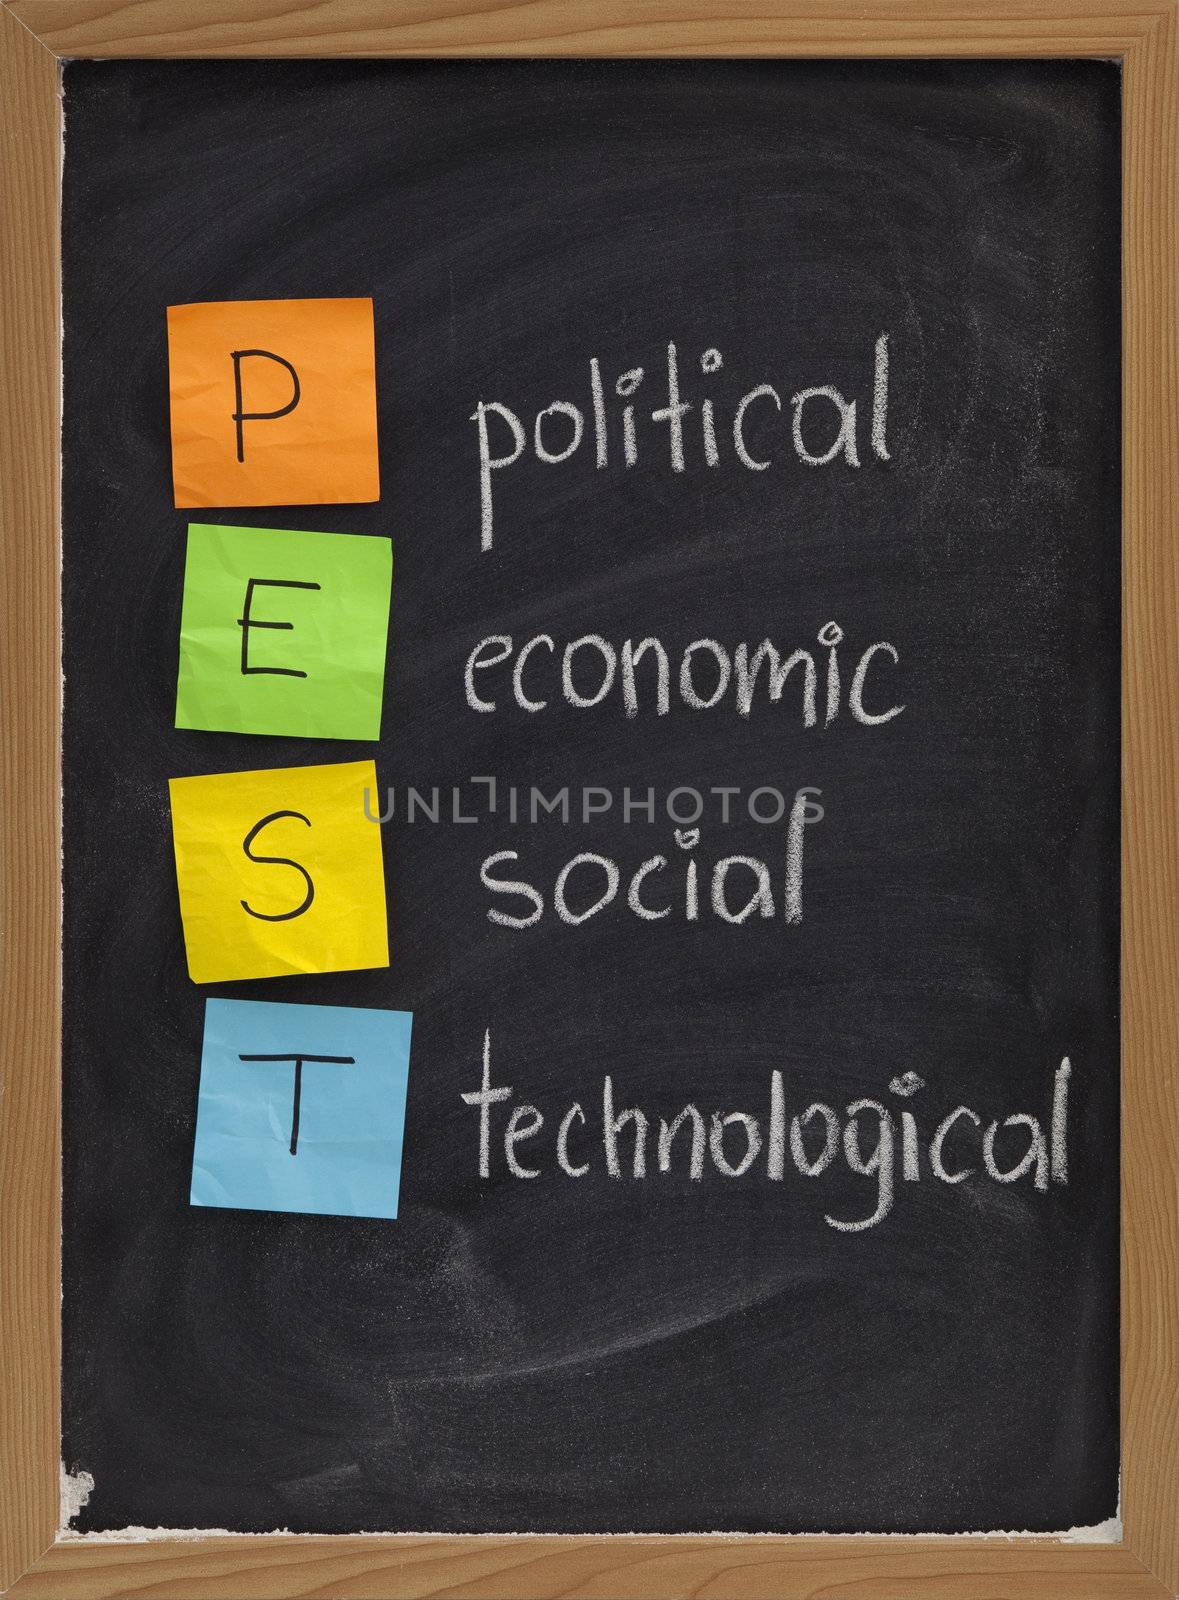 PEST (political, economic, social, technological)  analysis  to assess the market for a business or organizational unit, concept presented on blackboard with color sticky notes and white chalk handwriting